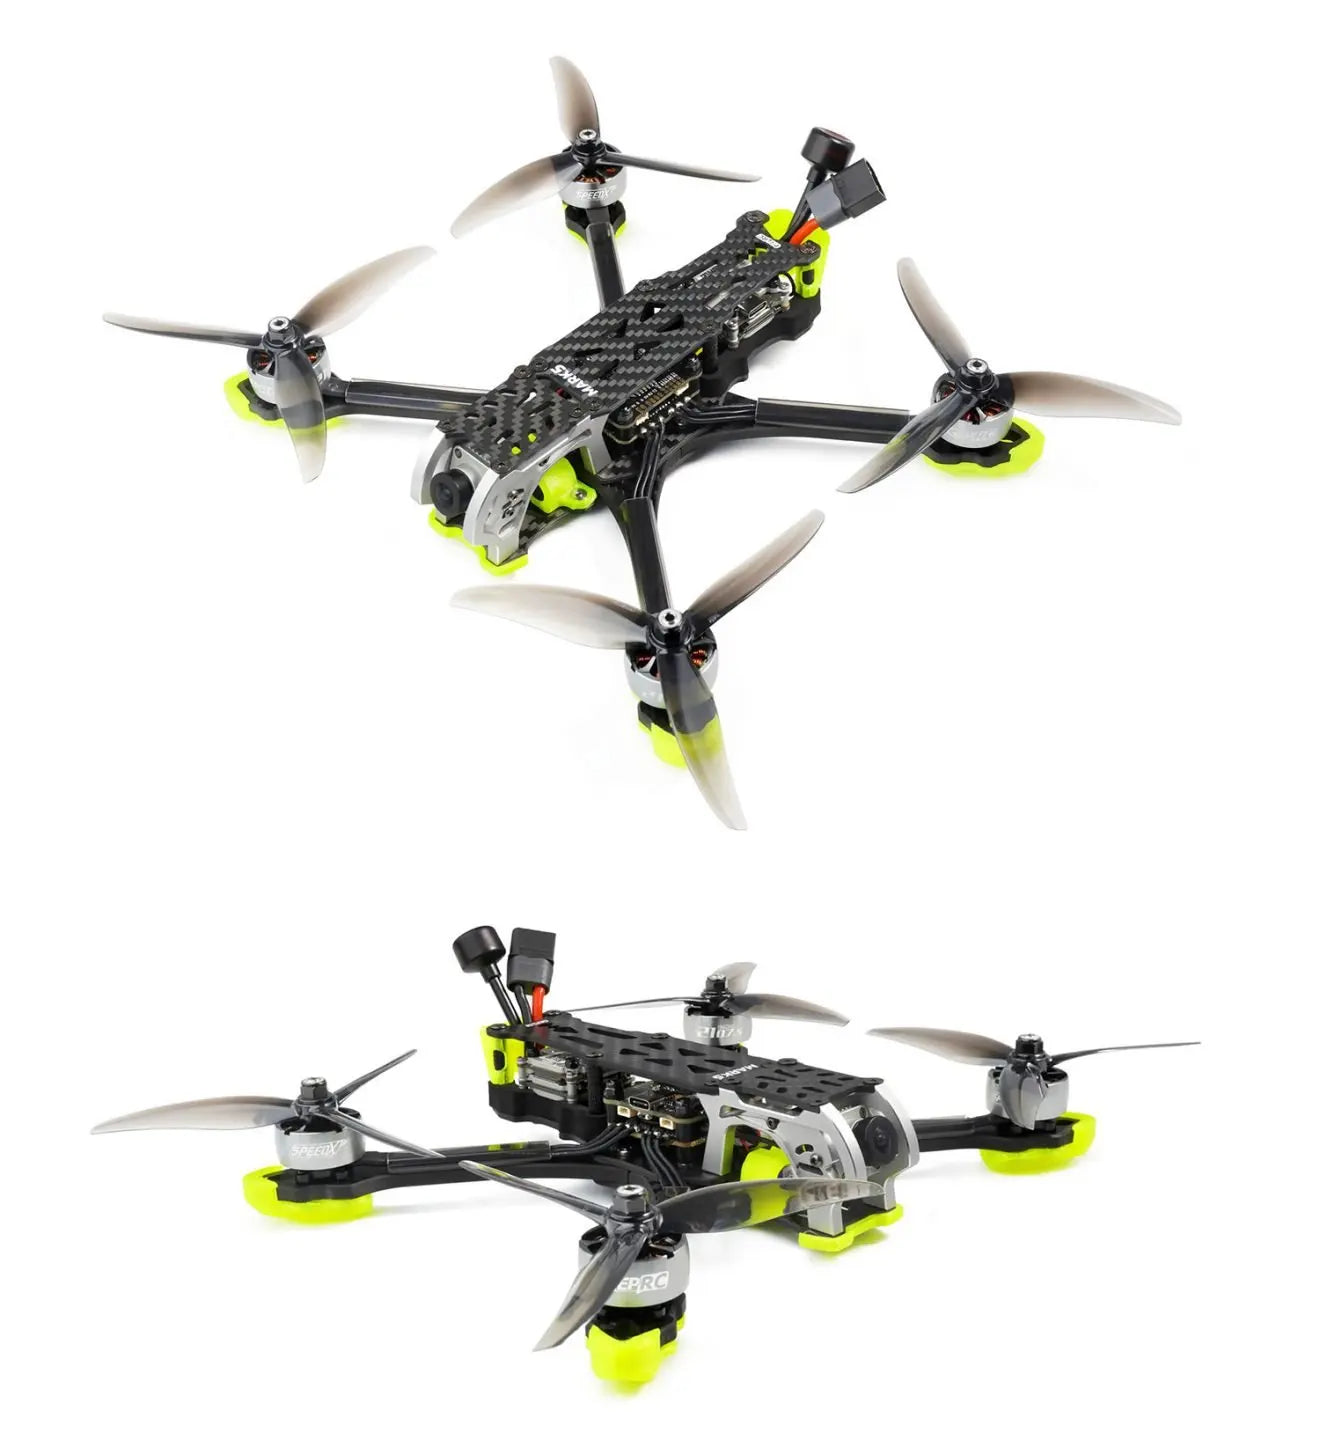 GEPRC MARK5 FPV Drone, Aluminum alloy side plates not only look stunning but reduce weight and add more endurance.